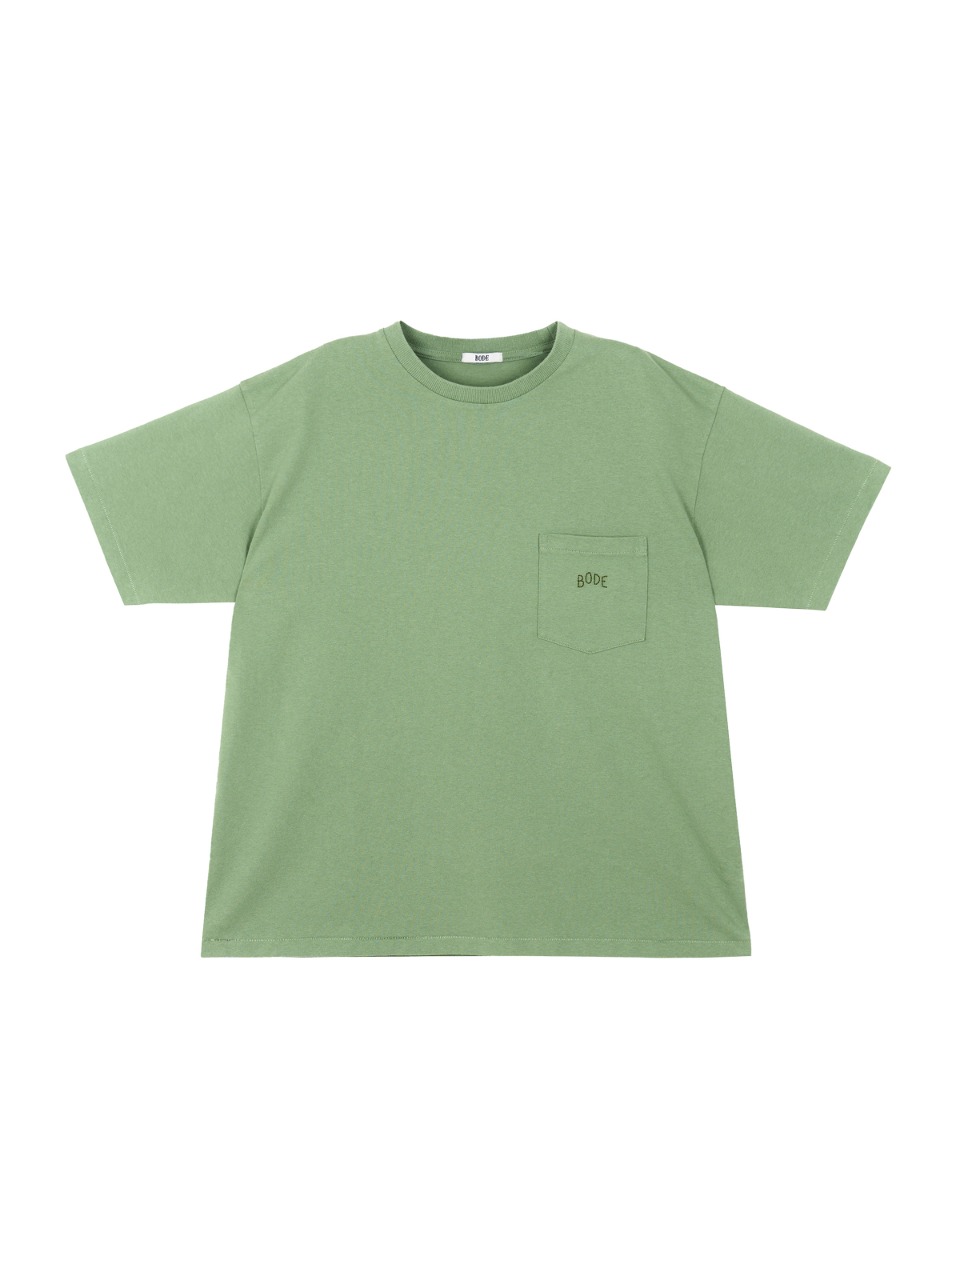 BODE - EMBROIDERED T-SHIRT (IVY)